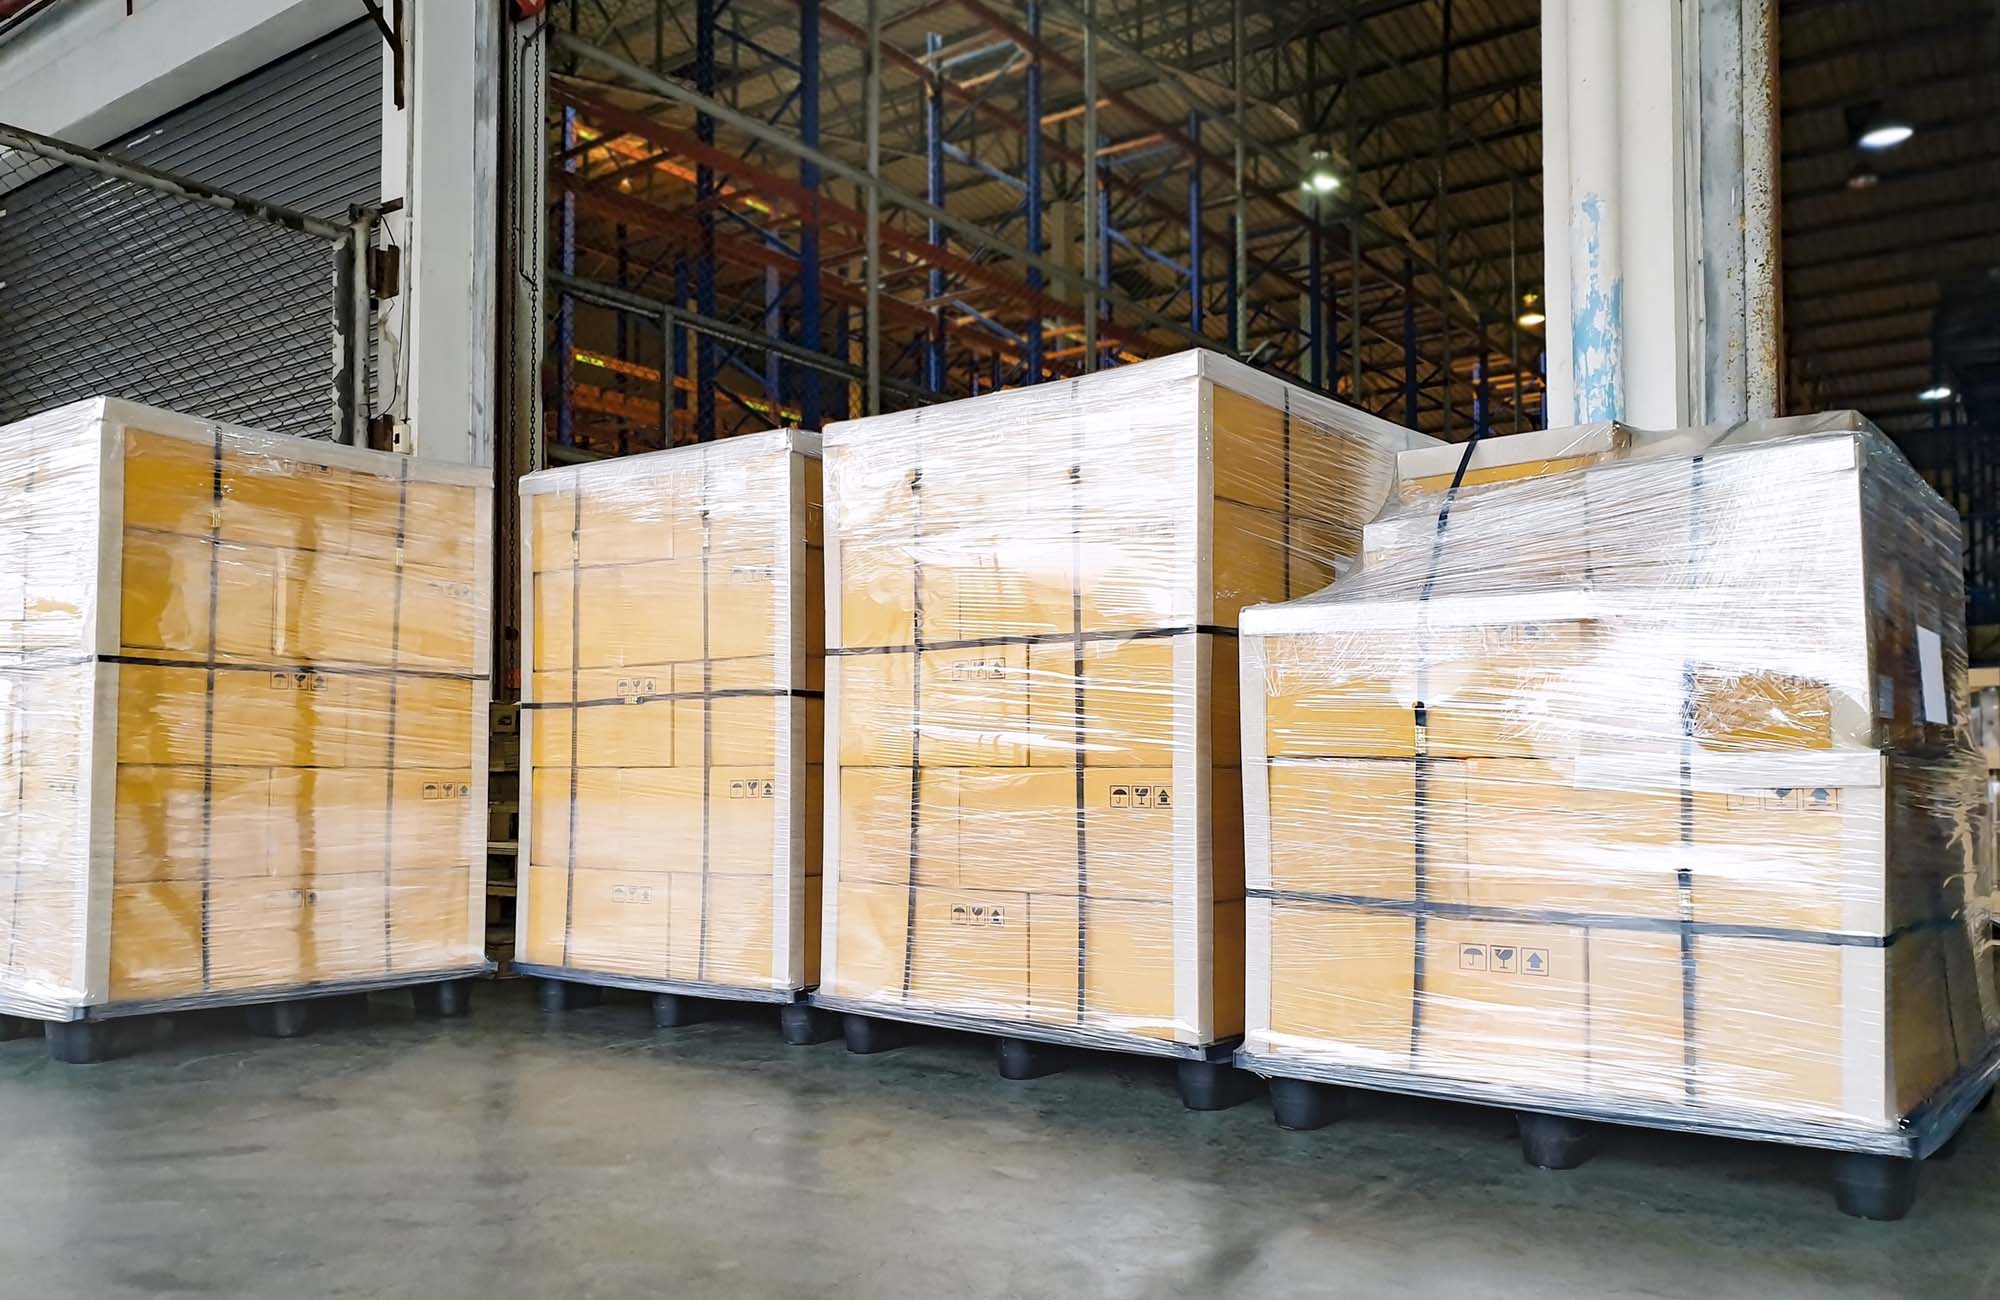 Large pallet goods,stack cardboard boxes wrapping plastic on pallets for export shipment, warehouse industry logistics, cargo transport